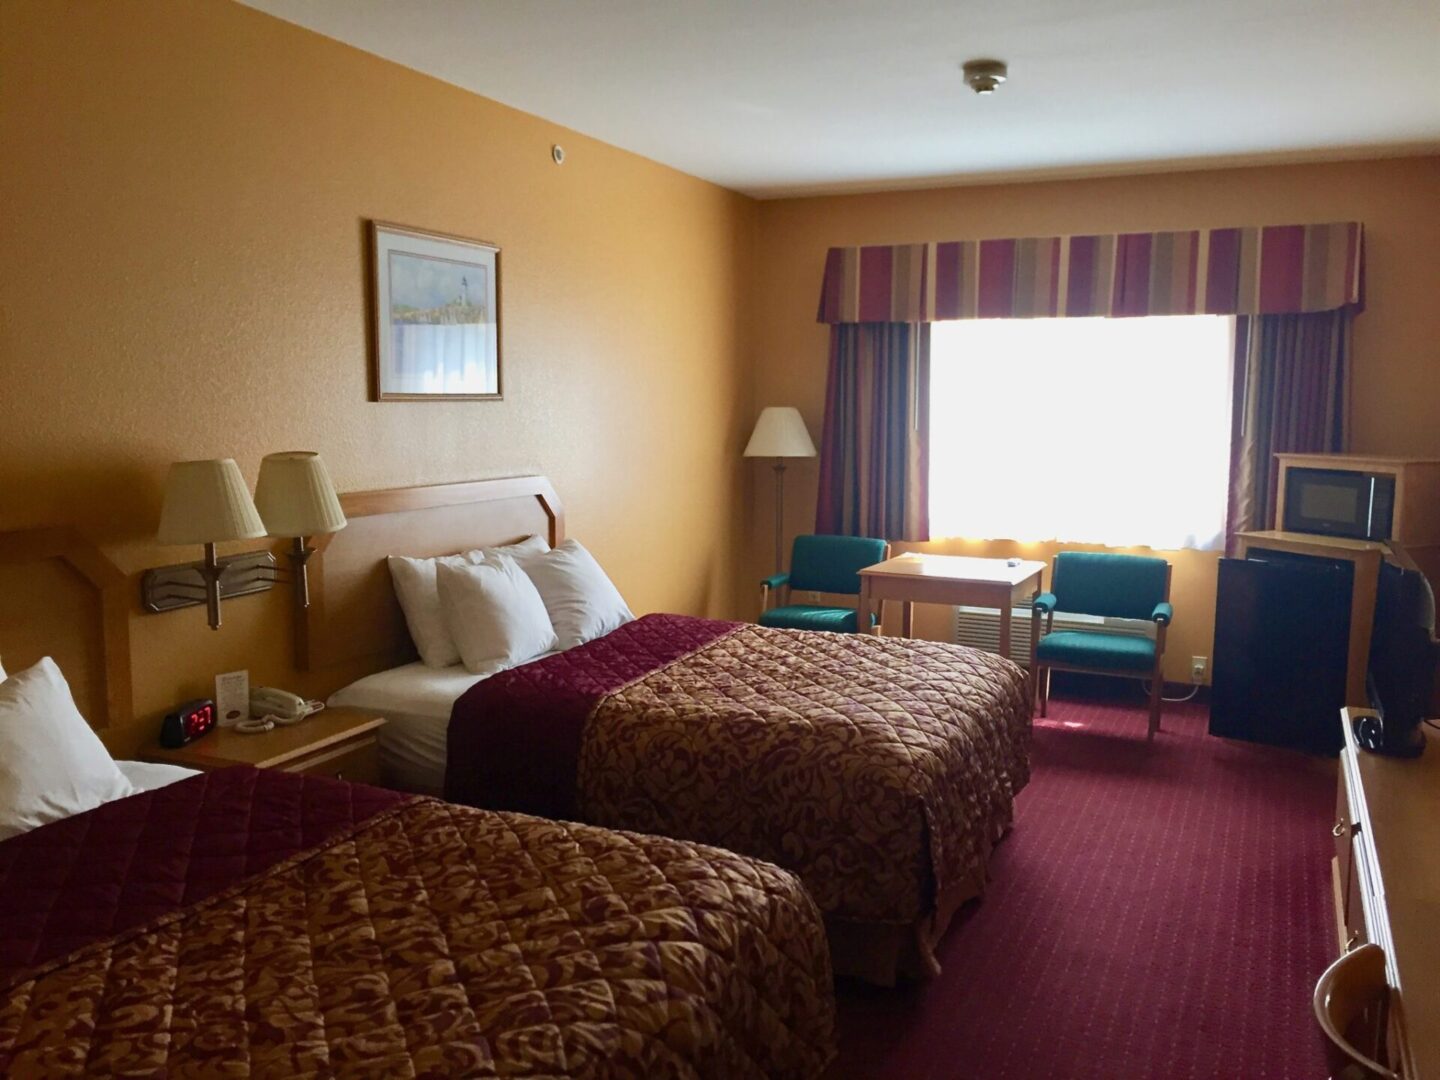 Hotel room with settee refrigerator, microwave, and more